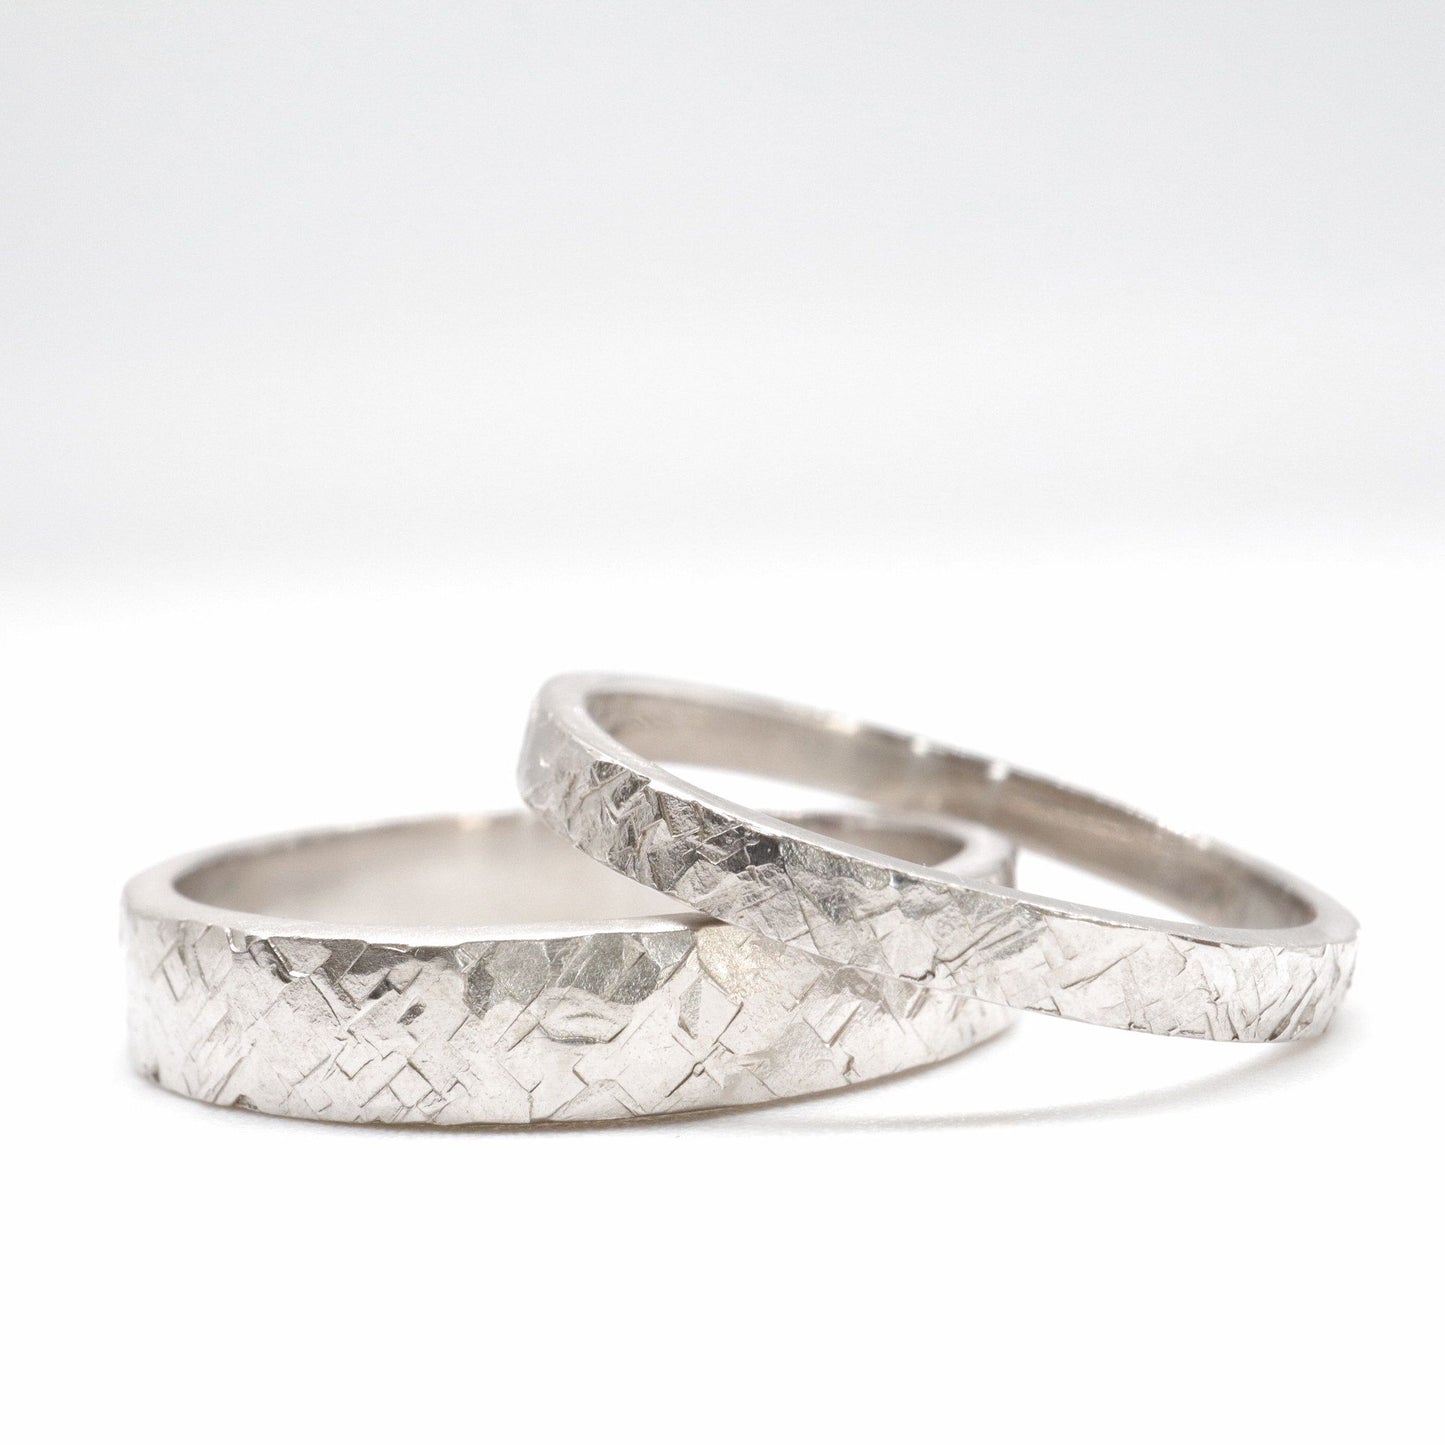 Matching Kendal Rustic Hammered 2mm and 4mm wedding ring set - flat textured white gold men and womens design.